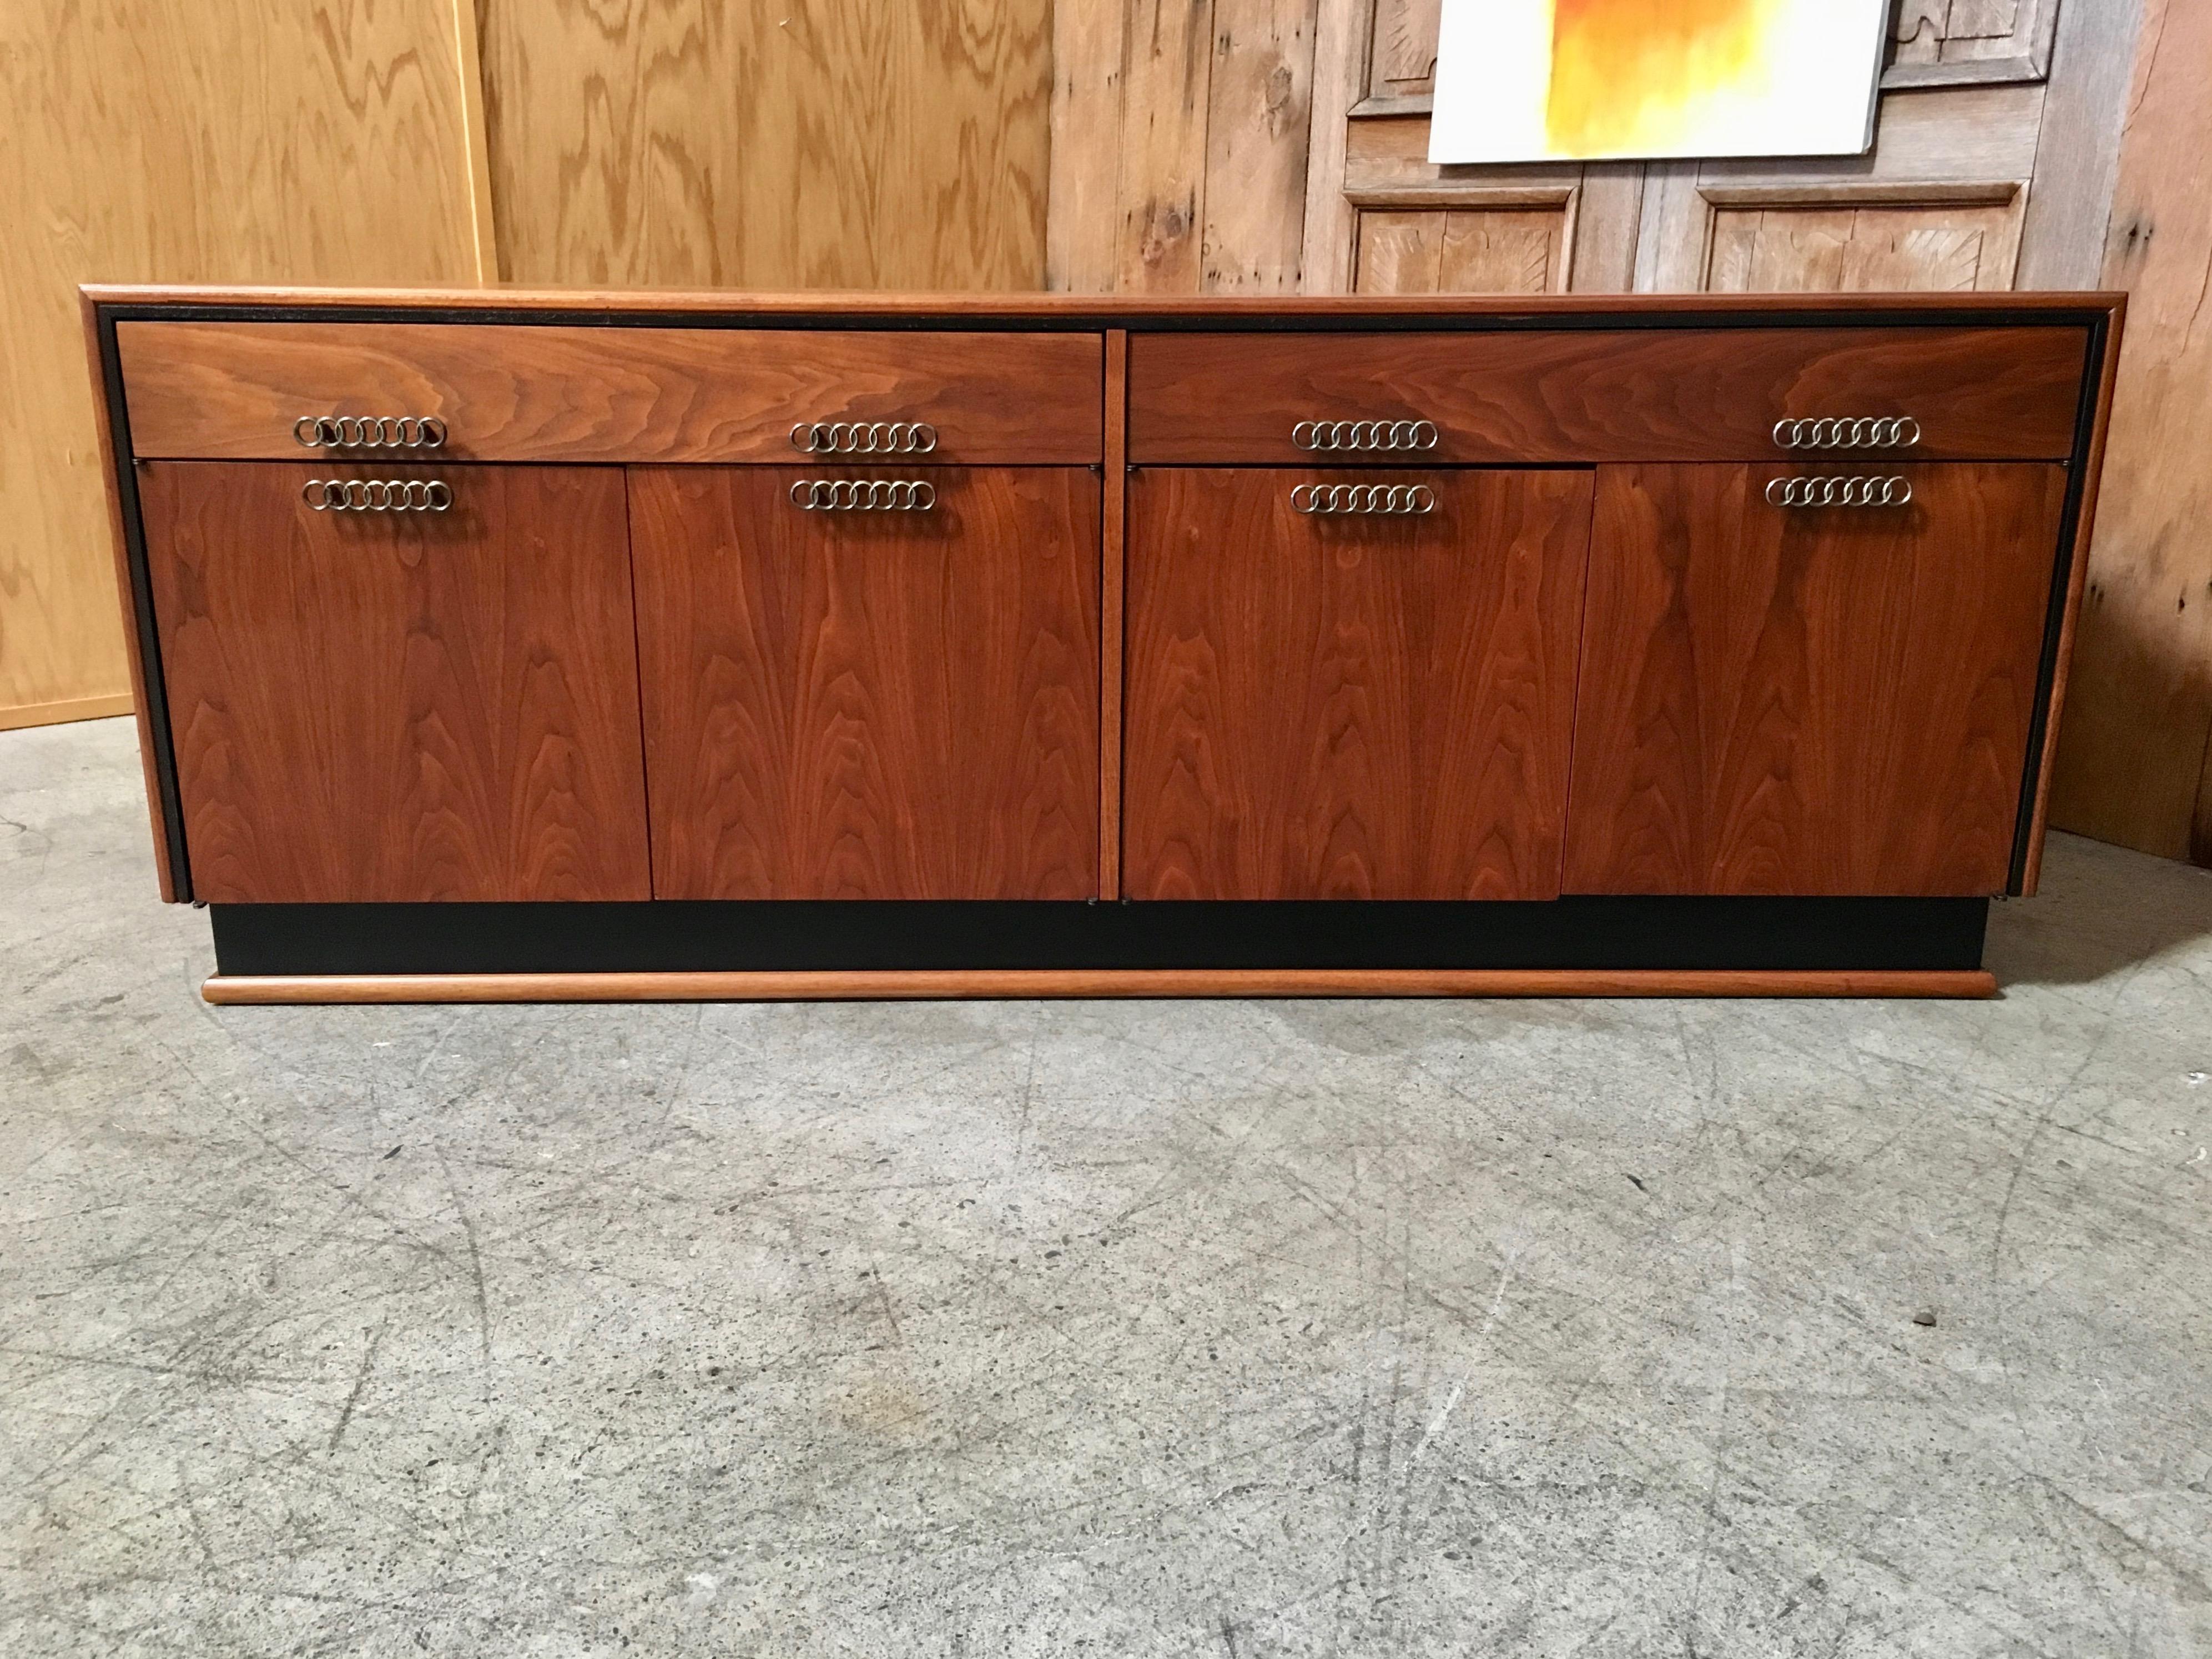 Stunning walnut with black accents two drawers over four doors with seven ring linked drawer pulls and adjustable shelves.